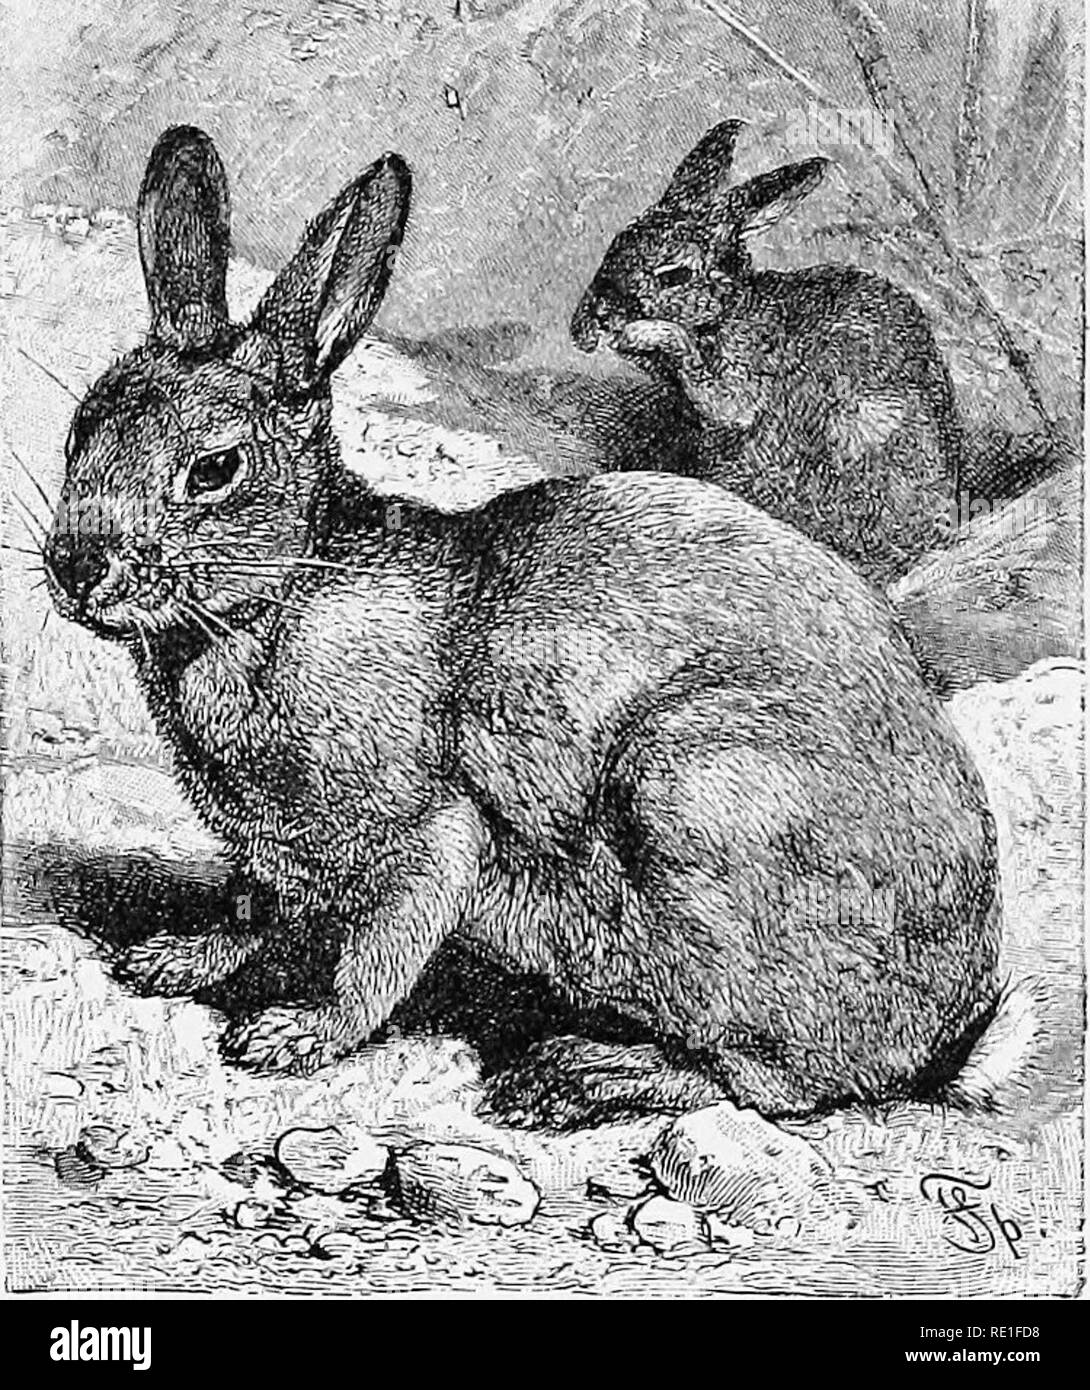 The world of animal life. Zoology. THE RABBIT 173 THE RABBIT The common  rabbit lives in holes which it digs in the ground. These holes are known as  burrows; and, when